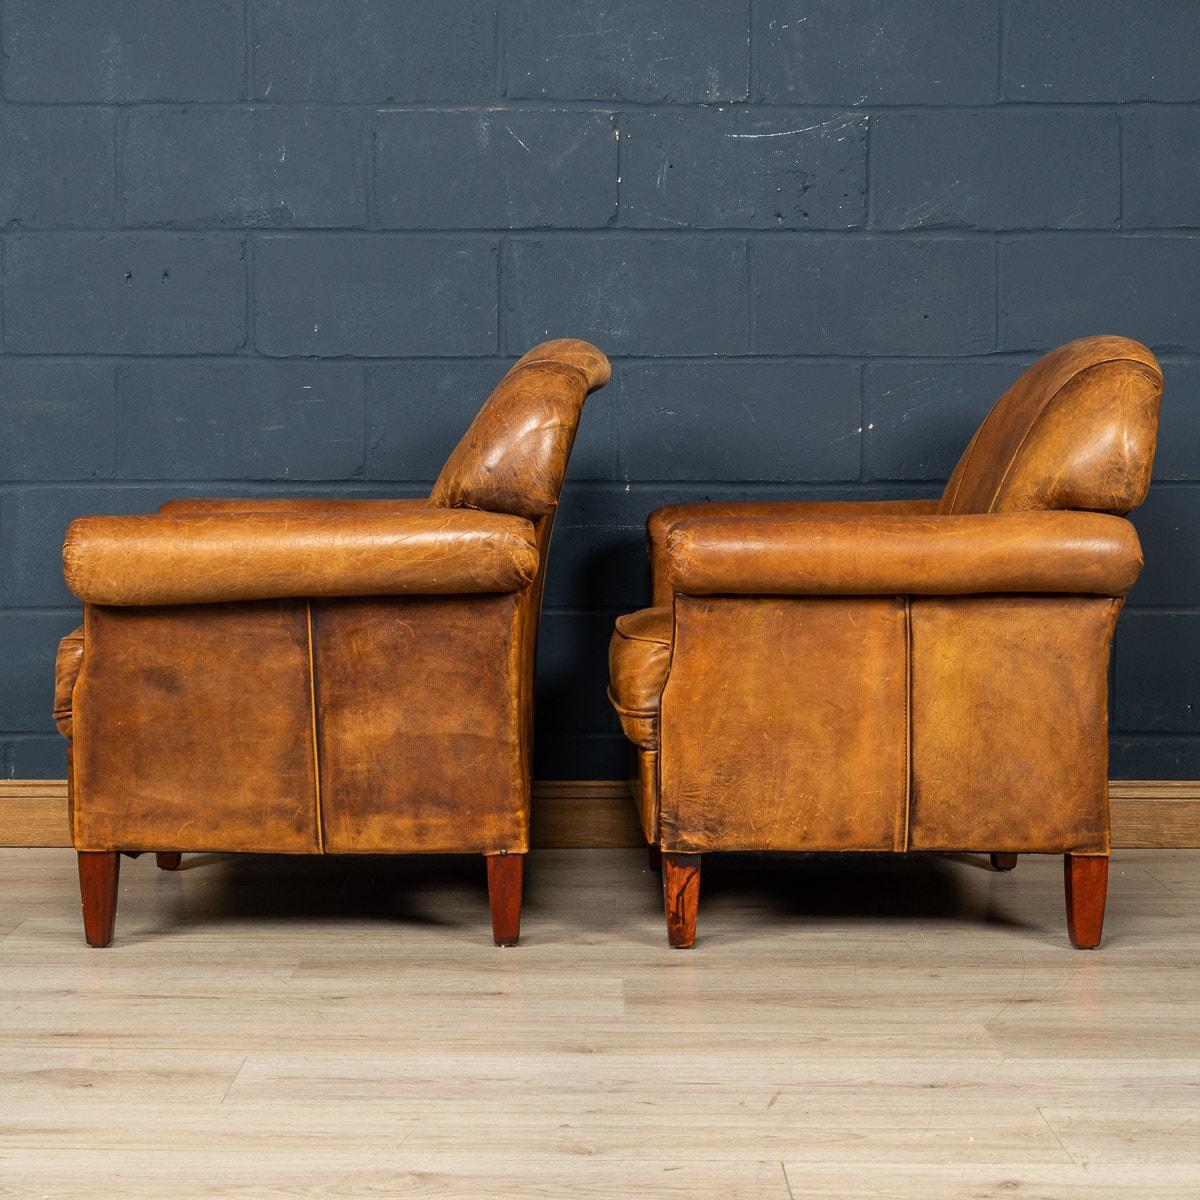 20th Century Dutch Sheepskin Leather Tub Chairs In Good Condition For Sale In Royal Tunbridge Wells, Kent